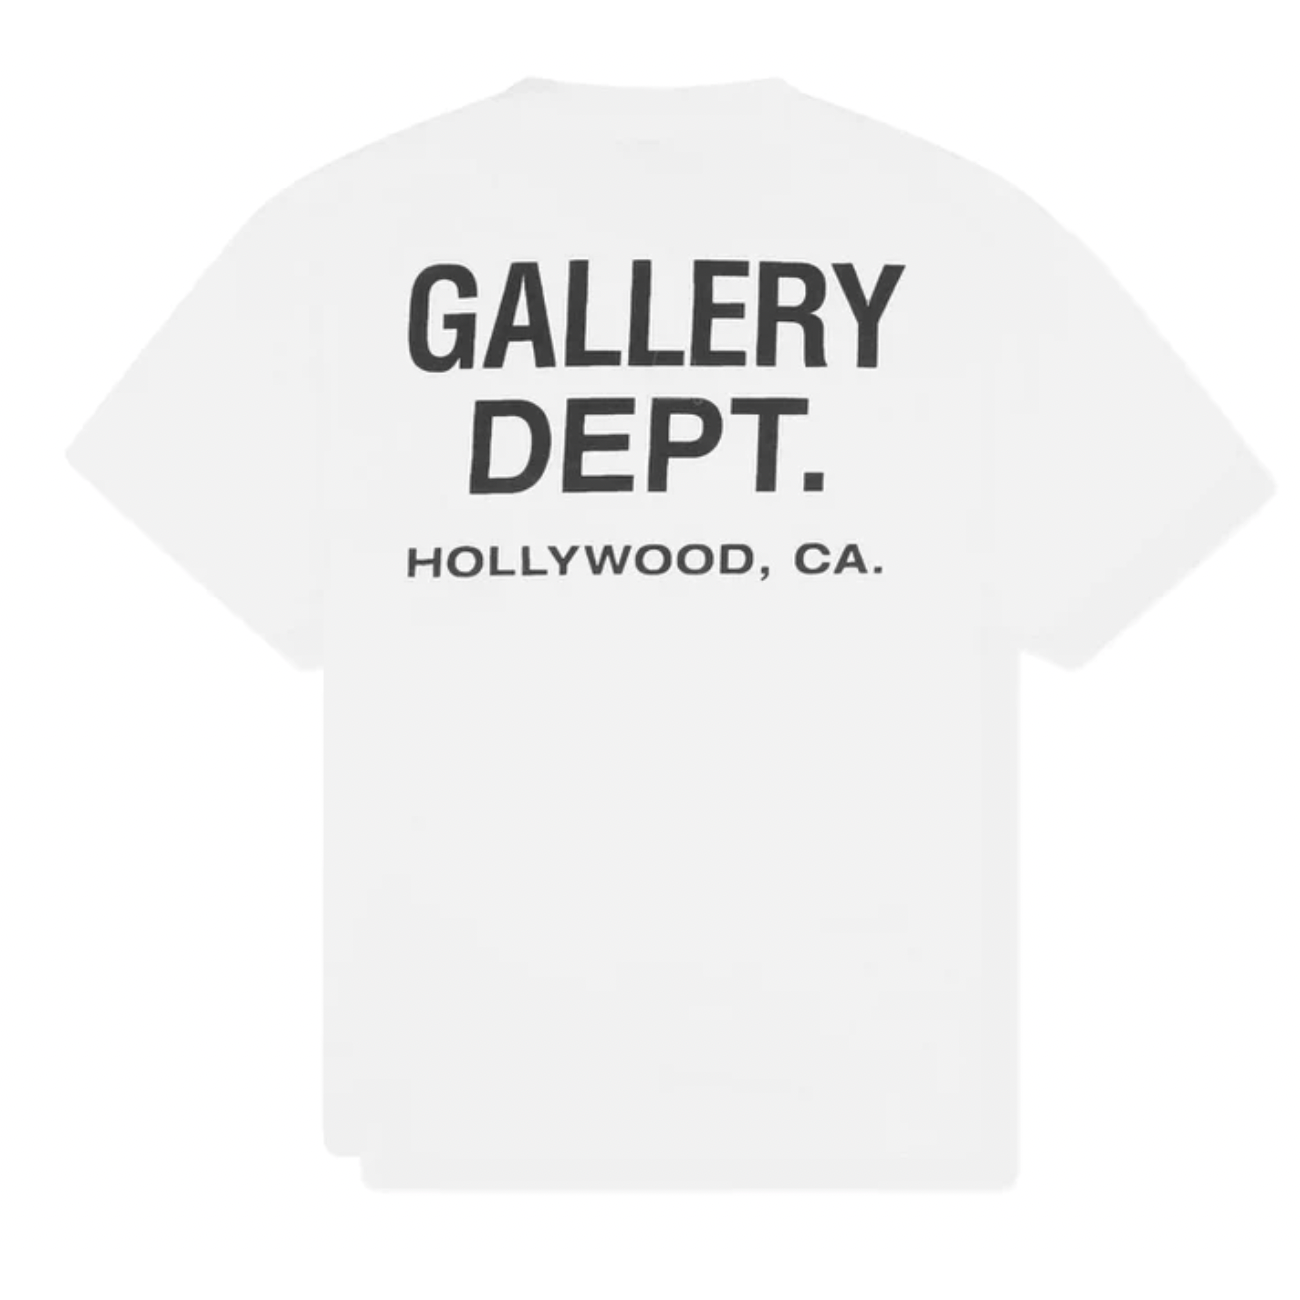 Gallery Dept. Souvenir T-Shirt White by GALLERY DEPT. from £200.99